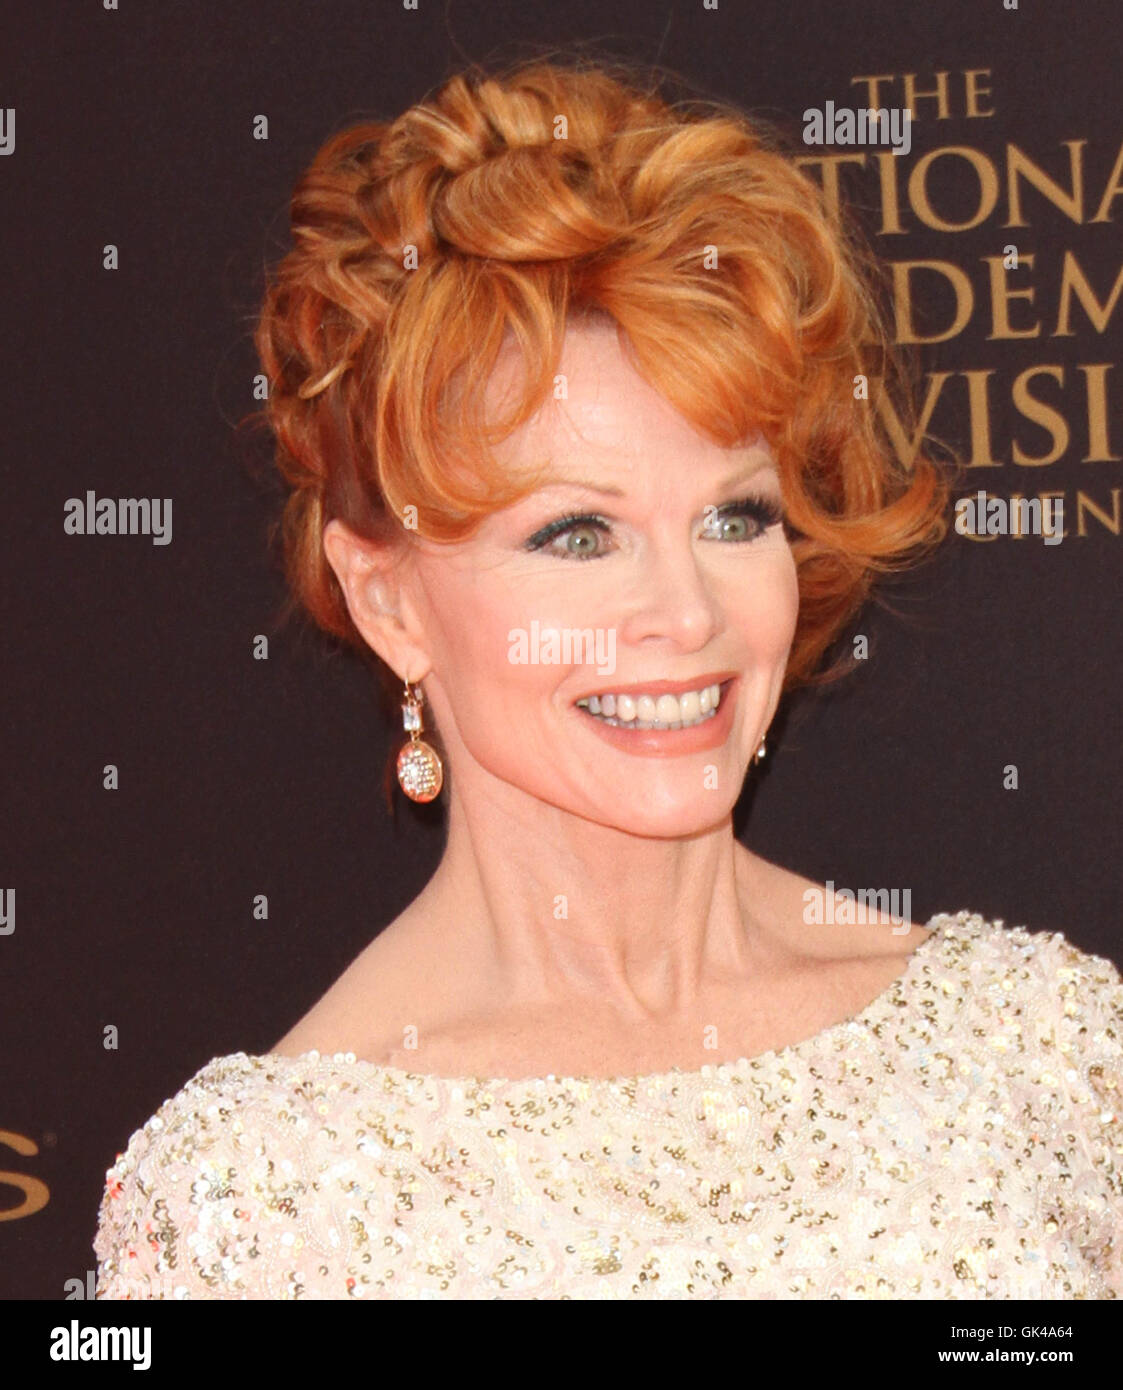 43rd Annual Daytime Emmy Awards Arrivals 2016 held at the Westin Bonaventure Hotel and Suites  Featuring: Patsy Pease Where: Los Angeles, California, United States When: 01 May 2016 Stock Photo